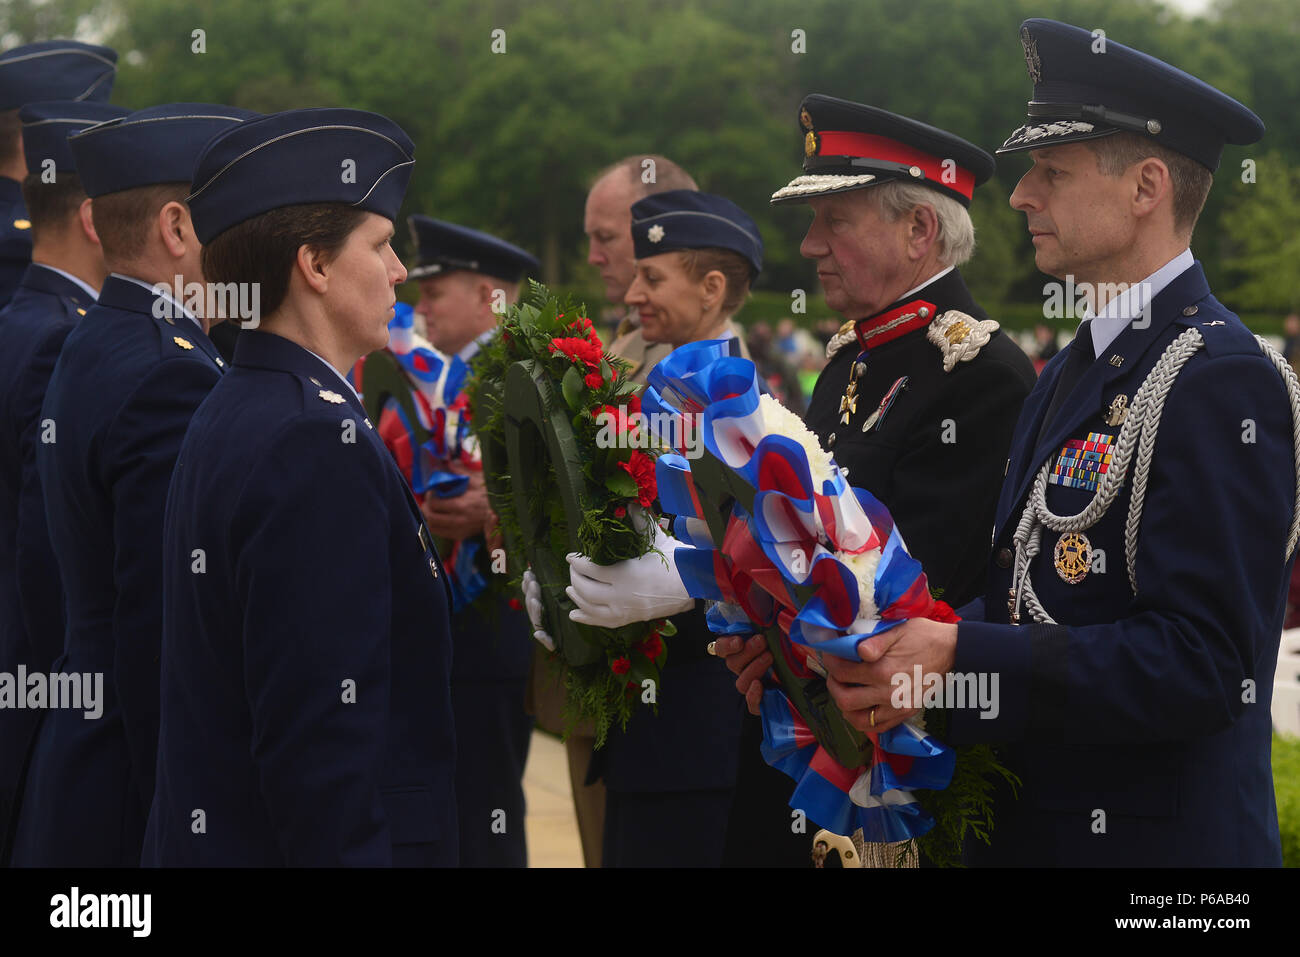 Sir Hugh Duberly, Her Majesty’s Lord-Lieutenant of Cambridgeshire and U.S. Air Force Brig Gen Dieter Bareihs, U.S. Senior Defense Attaché in London, accept their respective wreaths prior to placing them at the base of the Wall of the Missing on Memorial Day May 30, at Madingley American Cemetery in Cambridge, England. Hundreds gathered to honor the memory of the thousands of U.S. Soldiers, Sailors, Marines and Airmen who made the ultimate sacrifice in the service of their nation. (U.S. Air Force photo/ Tech Sgt. Matthew Plew) Stock Photo